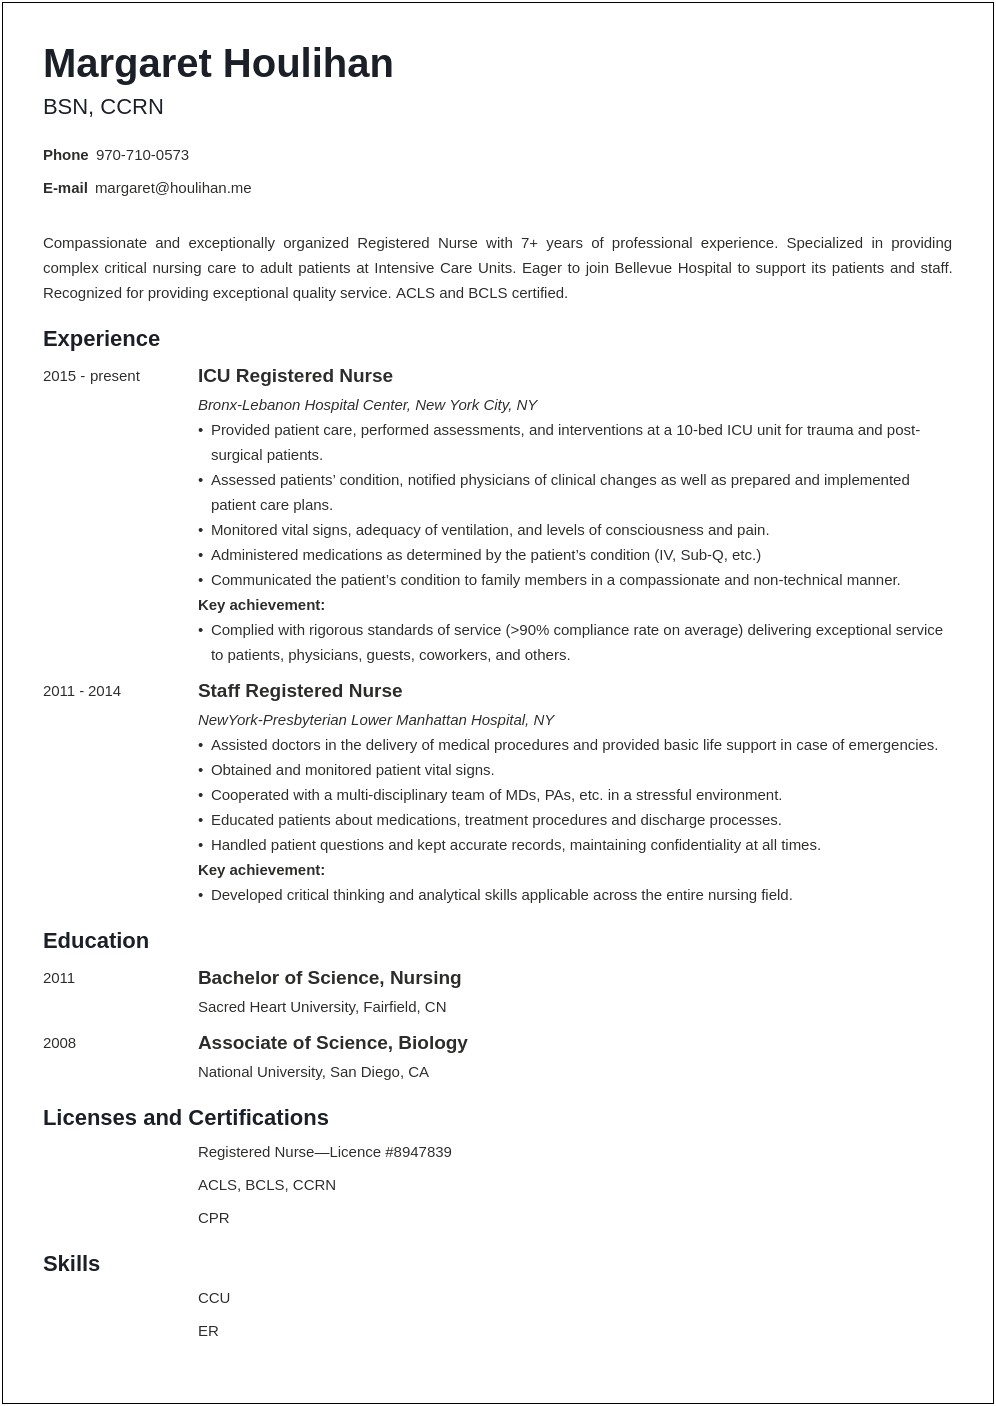 Acquired Experience In Pt Care Nursing Resume